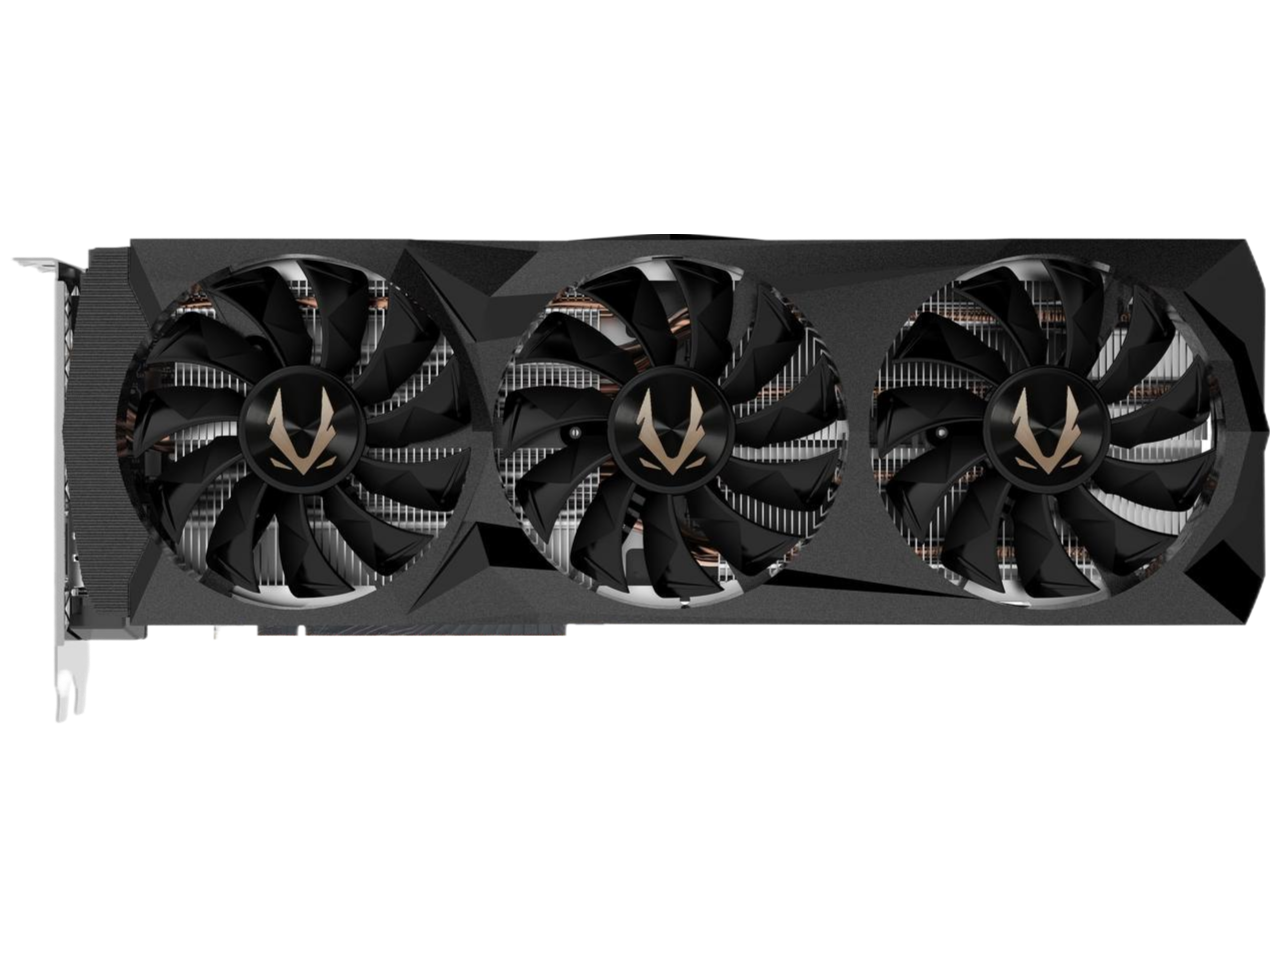 ZOTAC GAMING GeForce RTX 2080 Ti AMP 11GB GDDR6 352-bit Active Fan Control Metal Backplate Spectra Lighting Gaming Graphics Card ZT-T20810D-10P